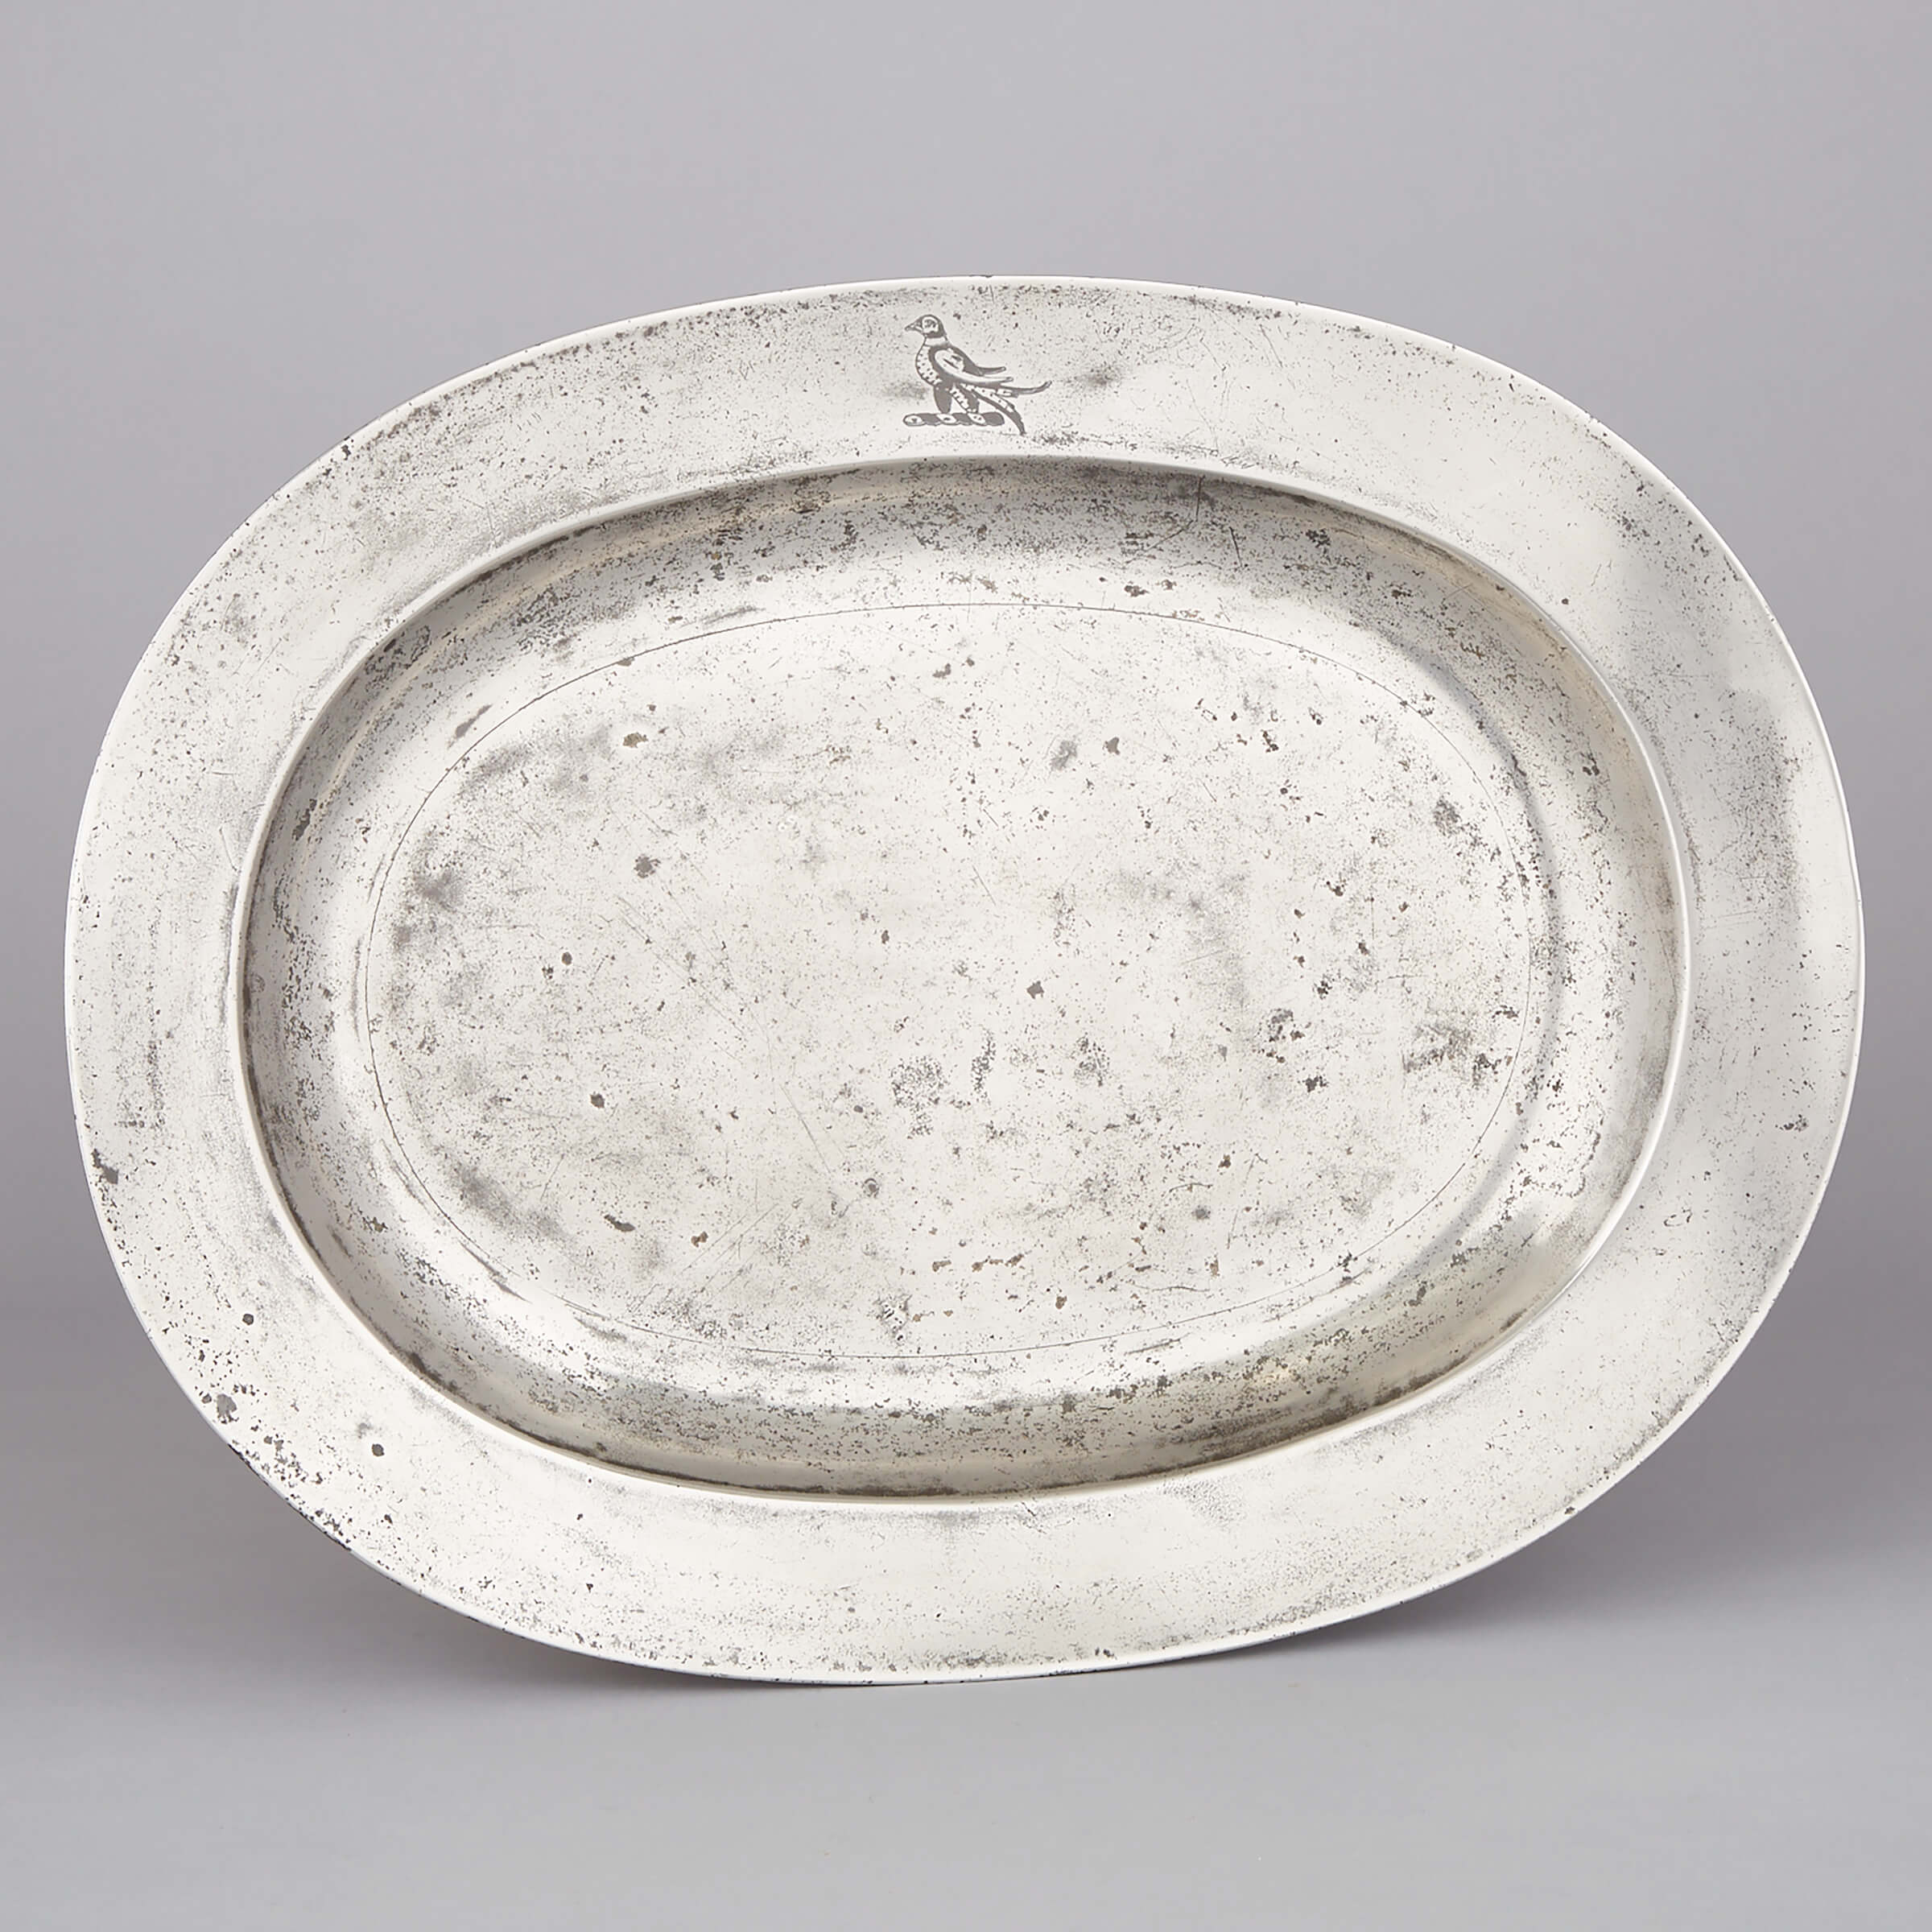 Large English Pewter Oval Charger, John Home, London, mid 18th century